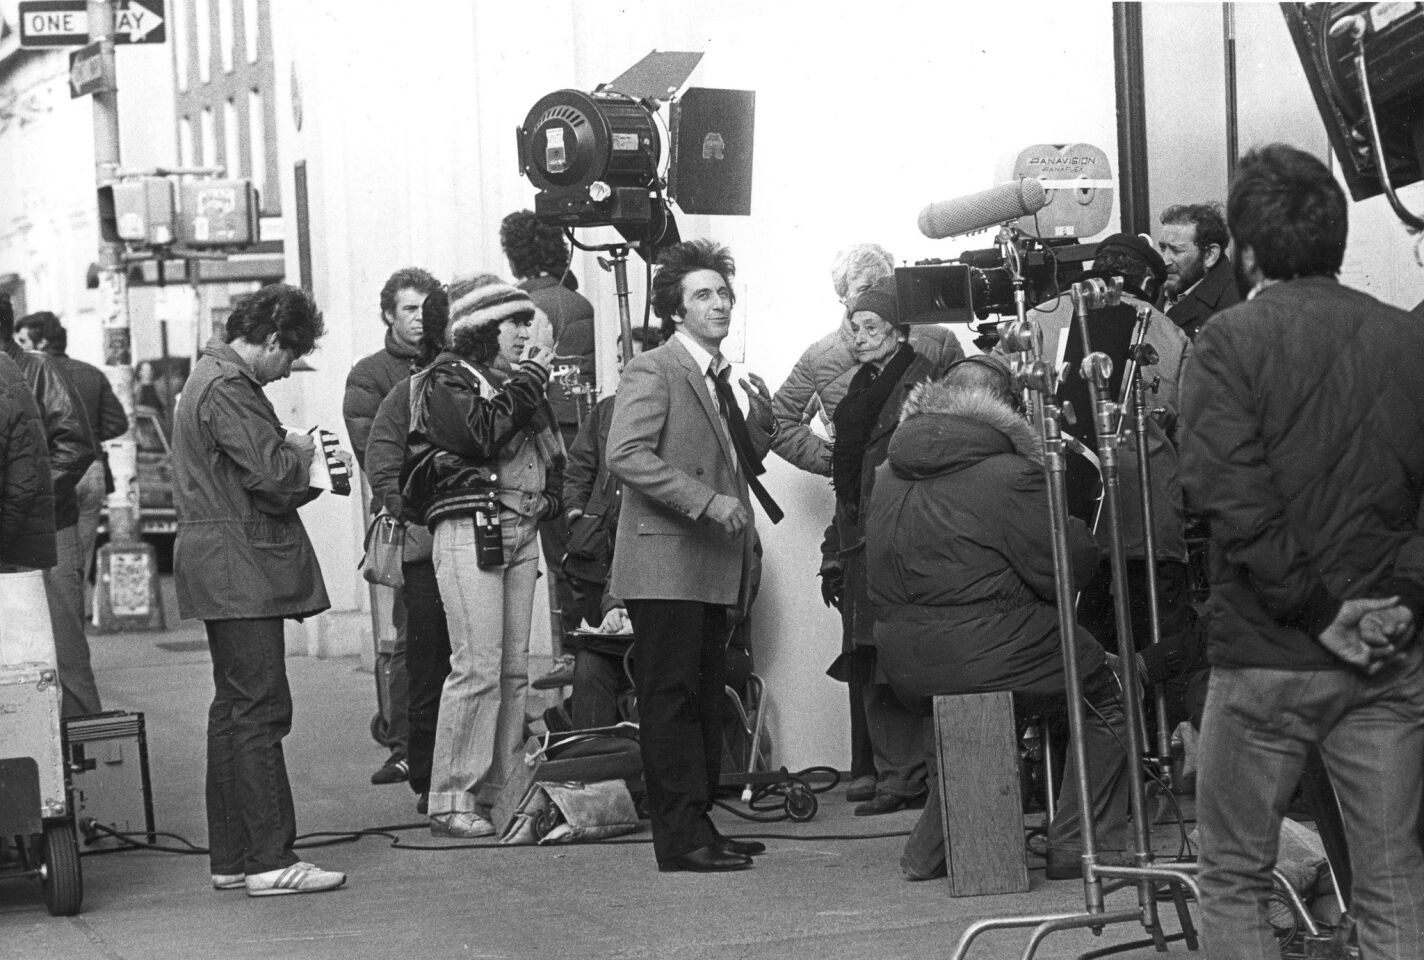 Al Pacino, center, is on the set of "Author! Author!" in New York City's Washington Square on Oct. 20, 1981.